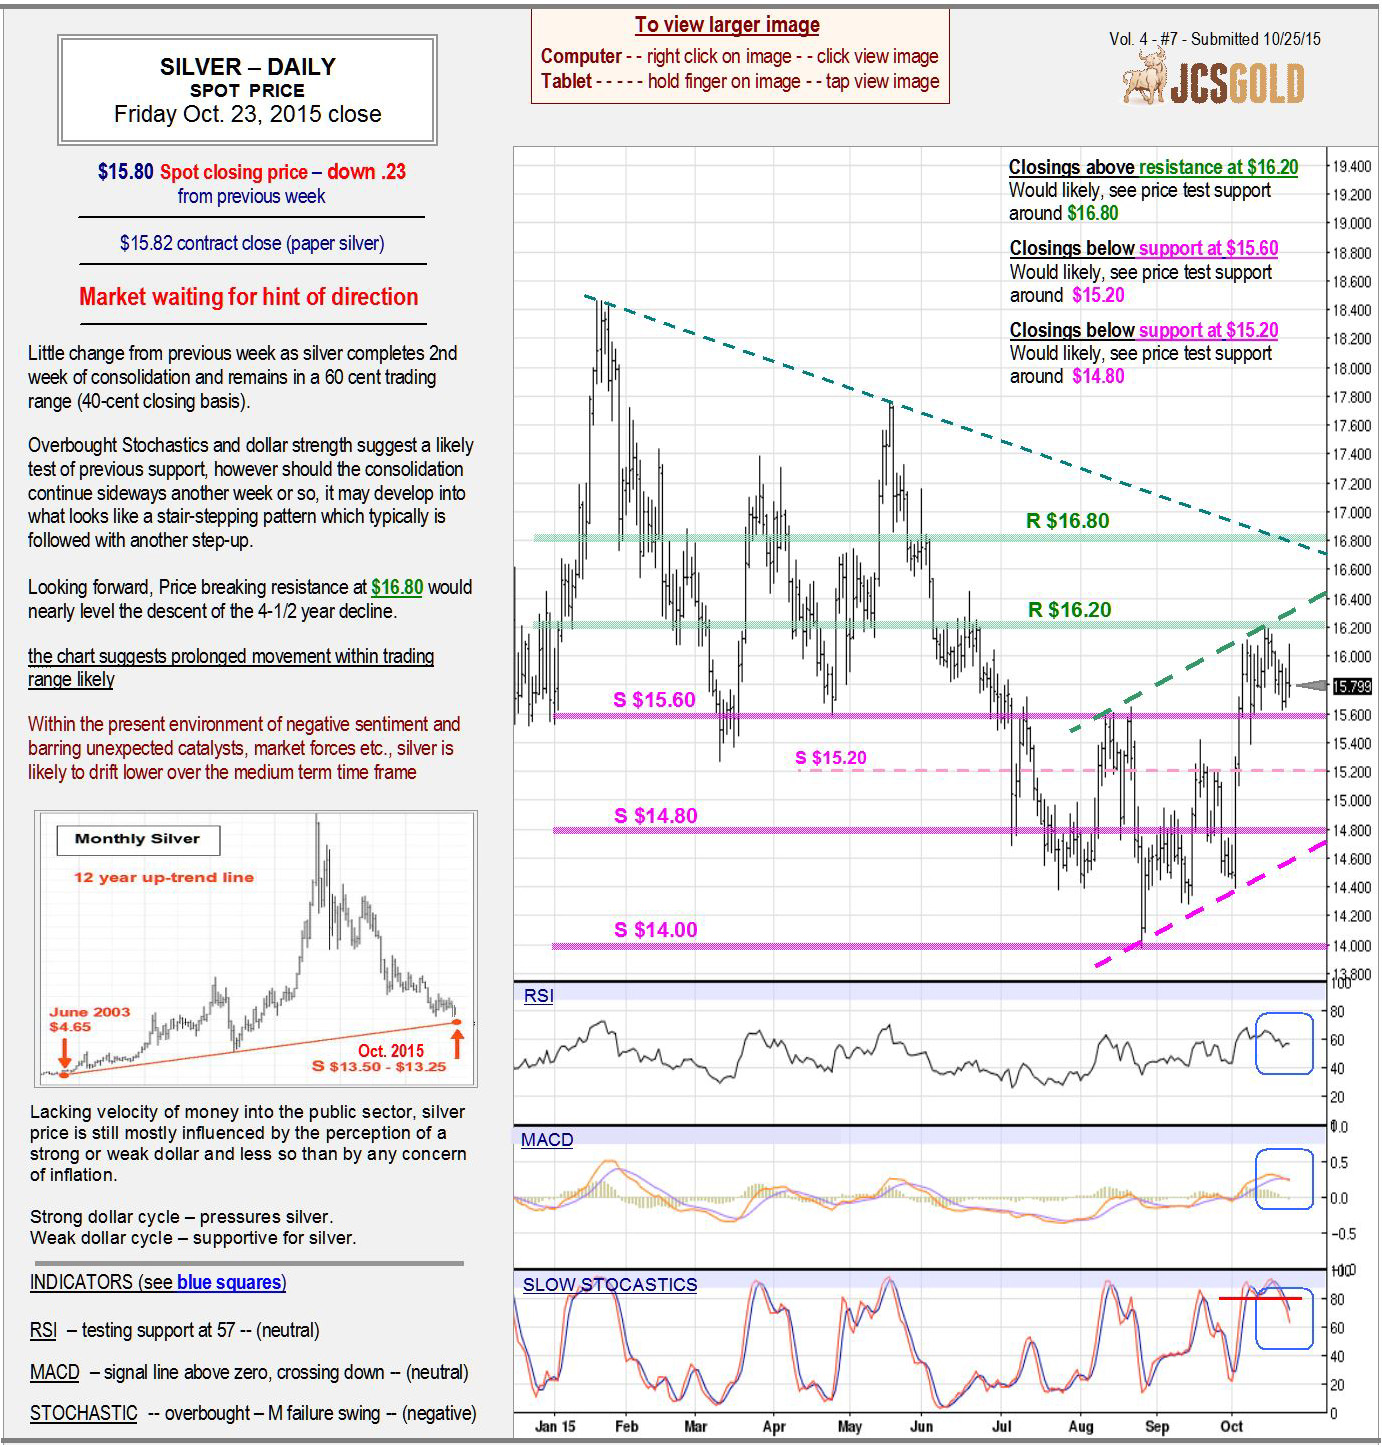 Oct 23, 2015 chart & commentary